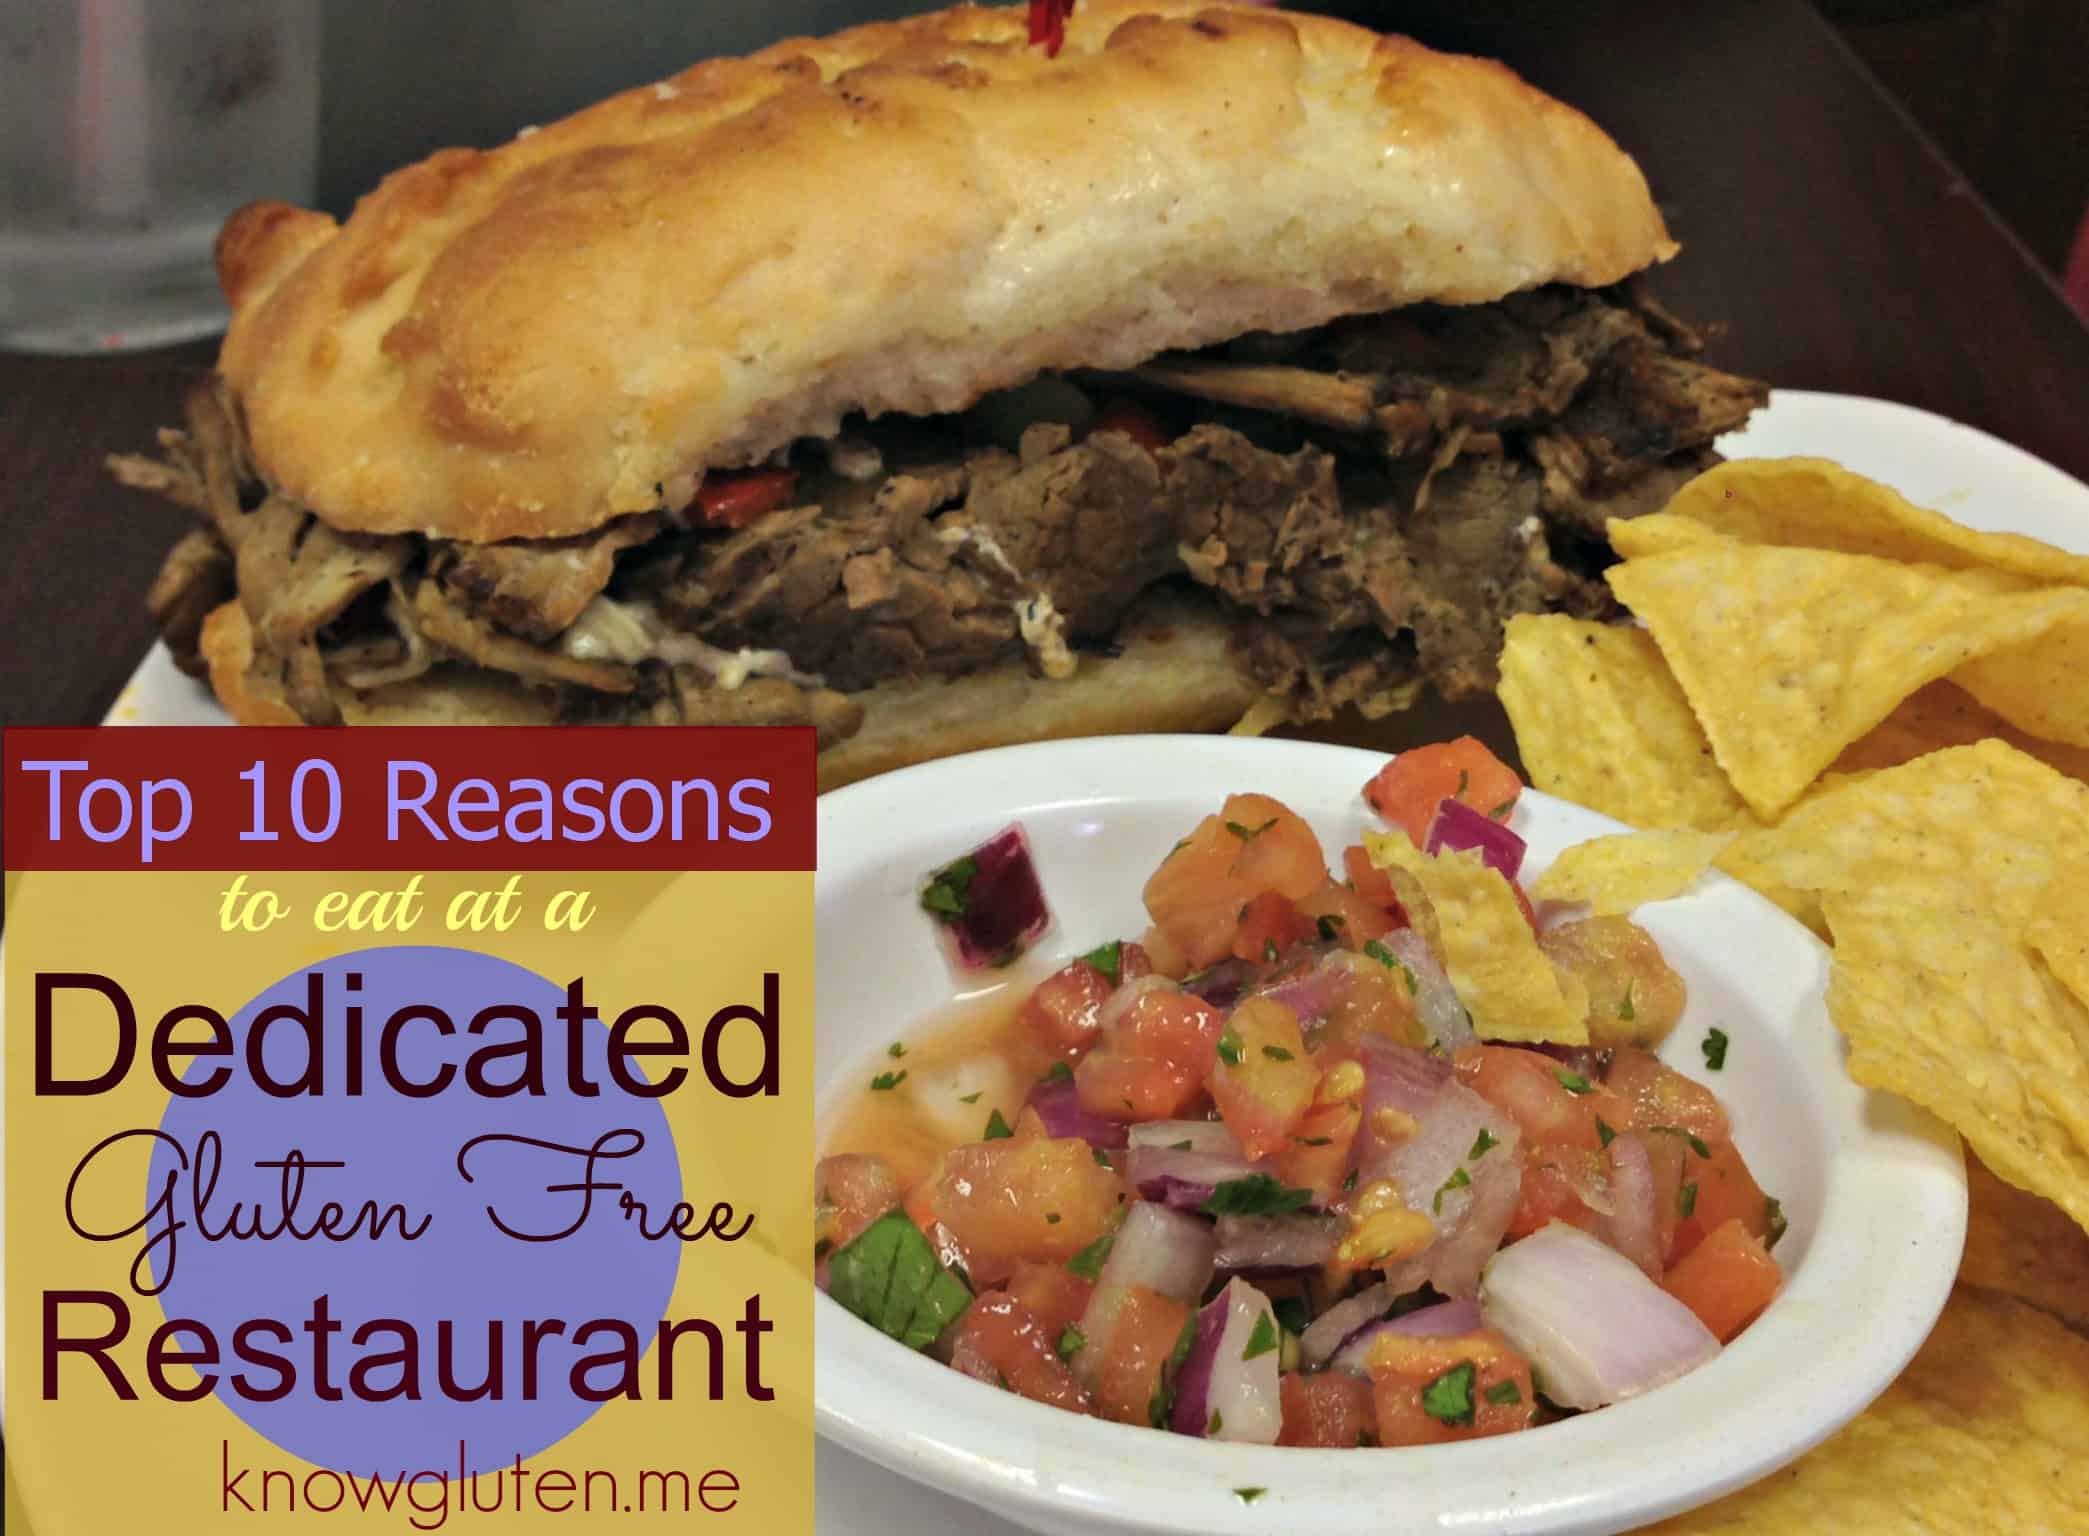 Top 10 Reasons to eat at a Dedicated Gluten Free Restaurant from knowgluten.me